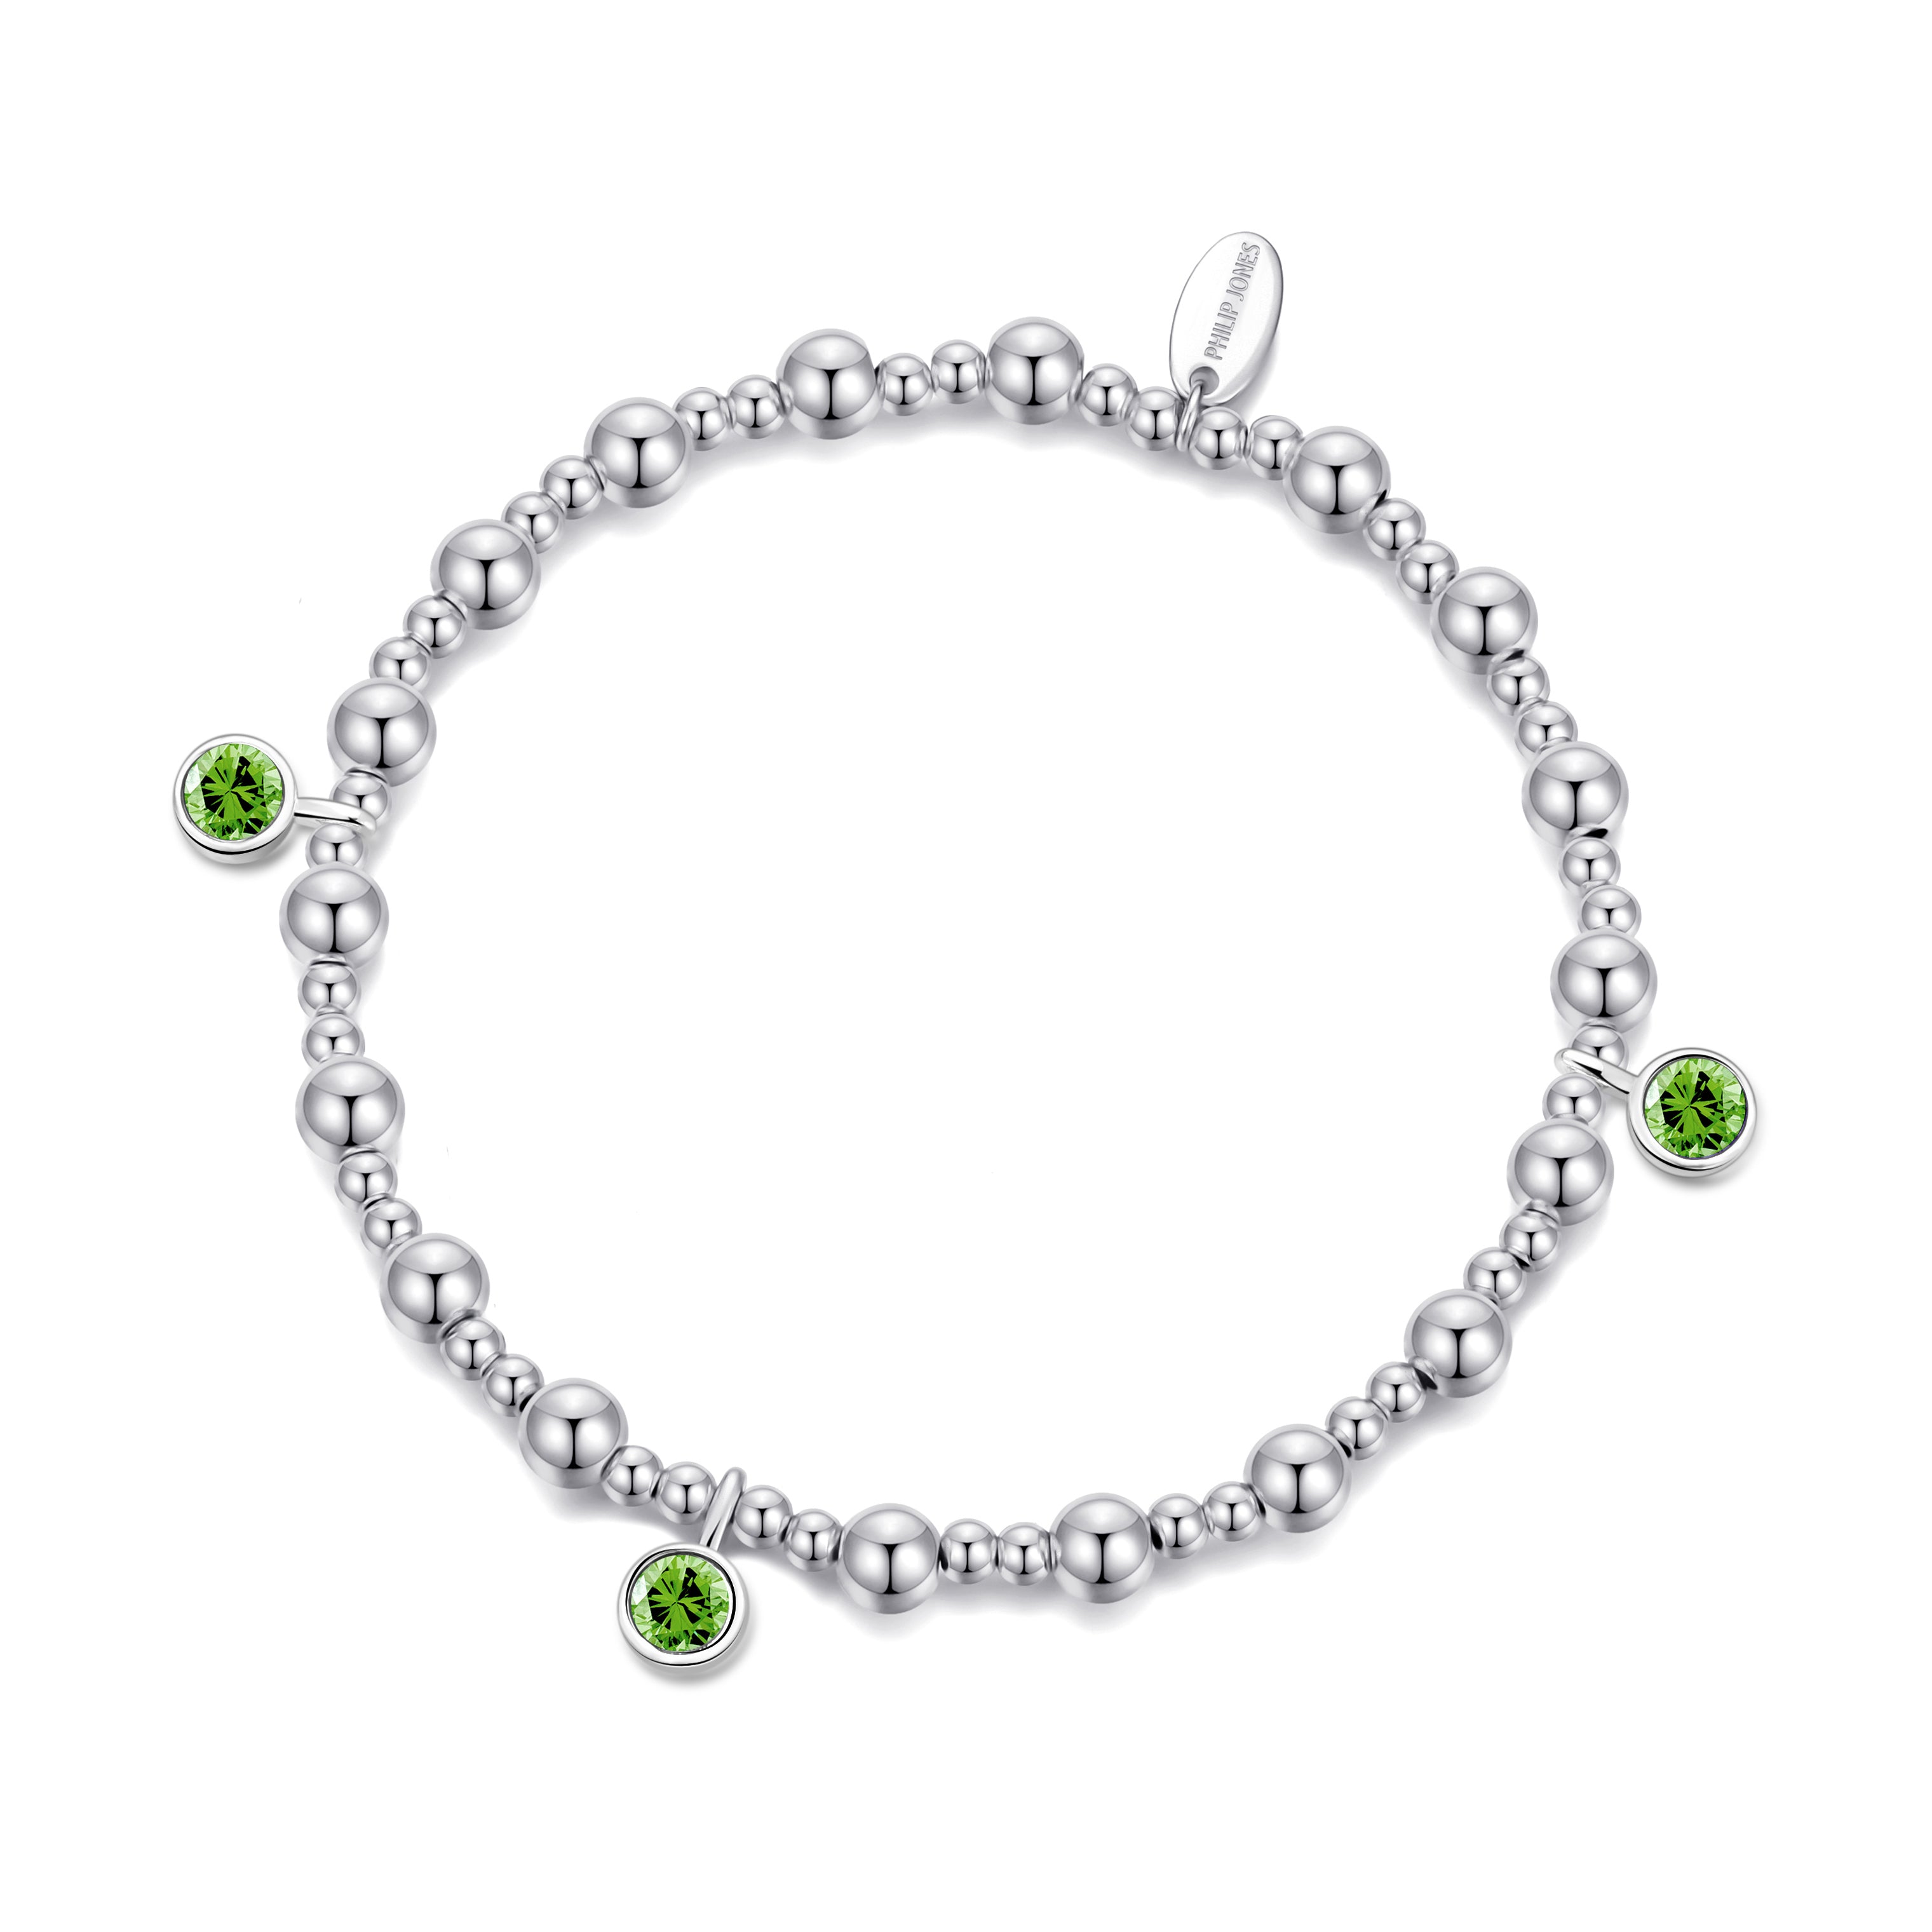 August (Peridot) Birthstone Stretch Charm Bracelet with Quote Gift Box